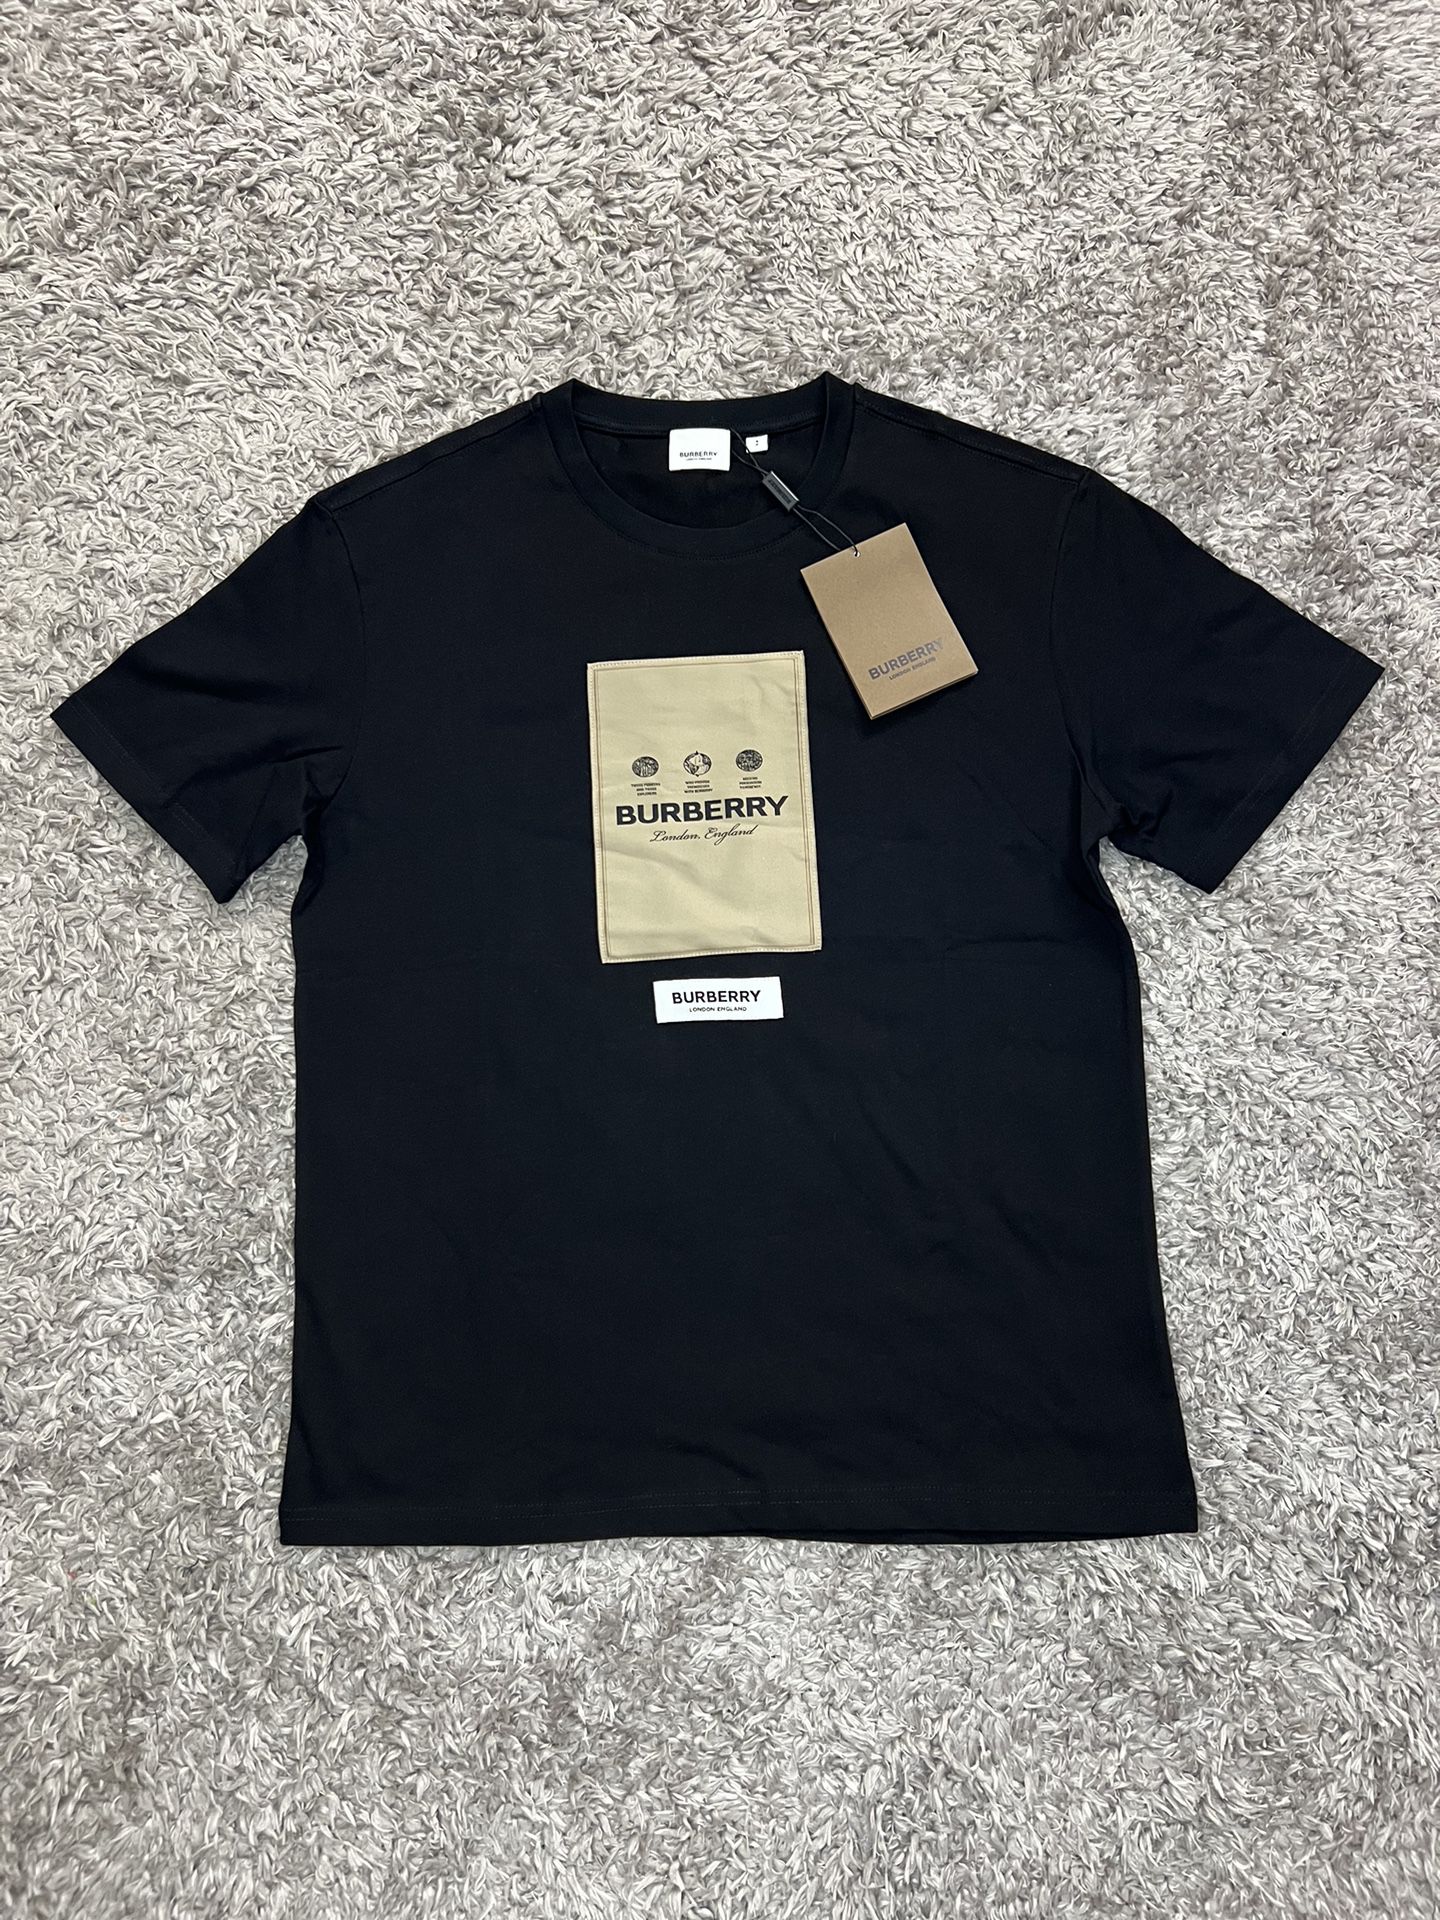 Burberry t shirt size S